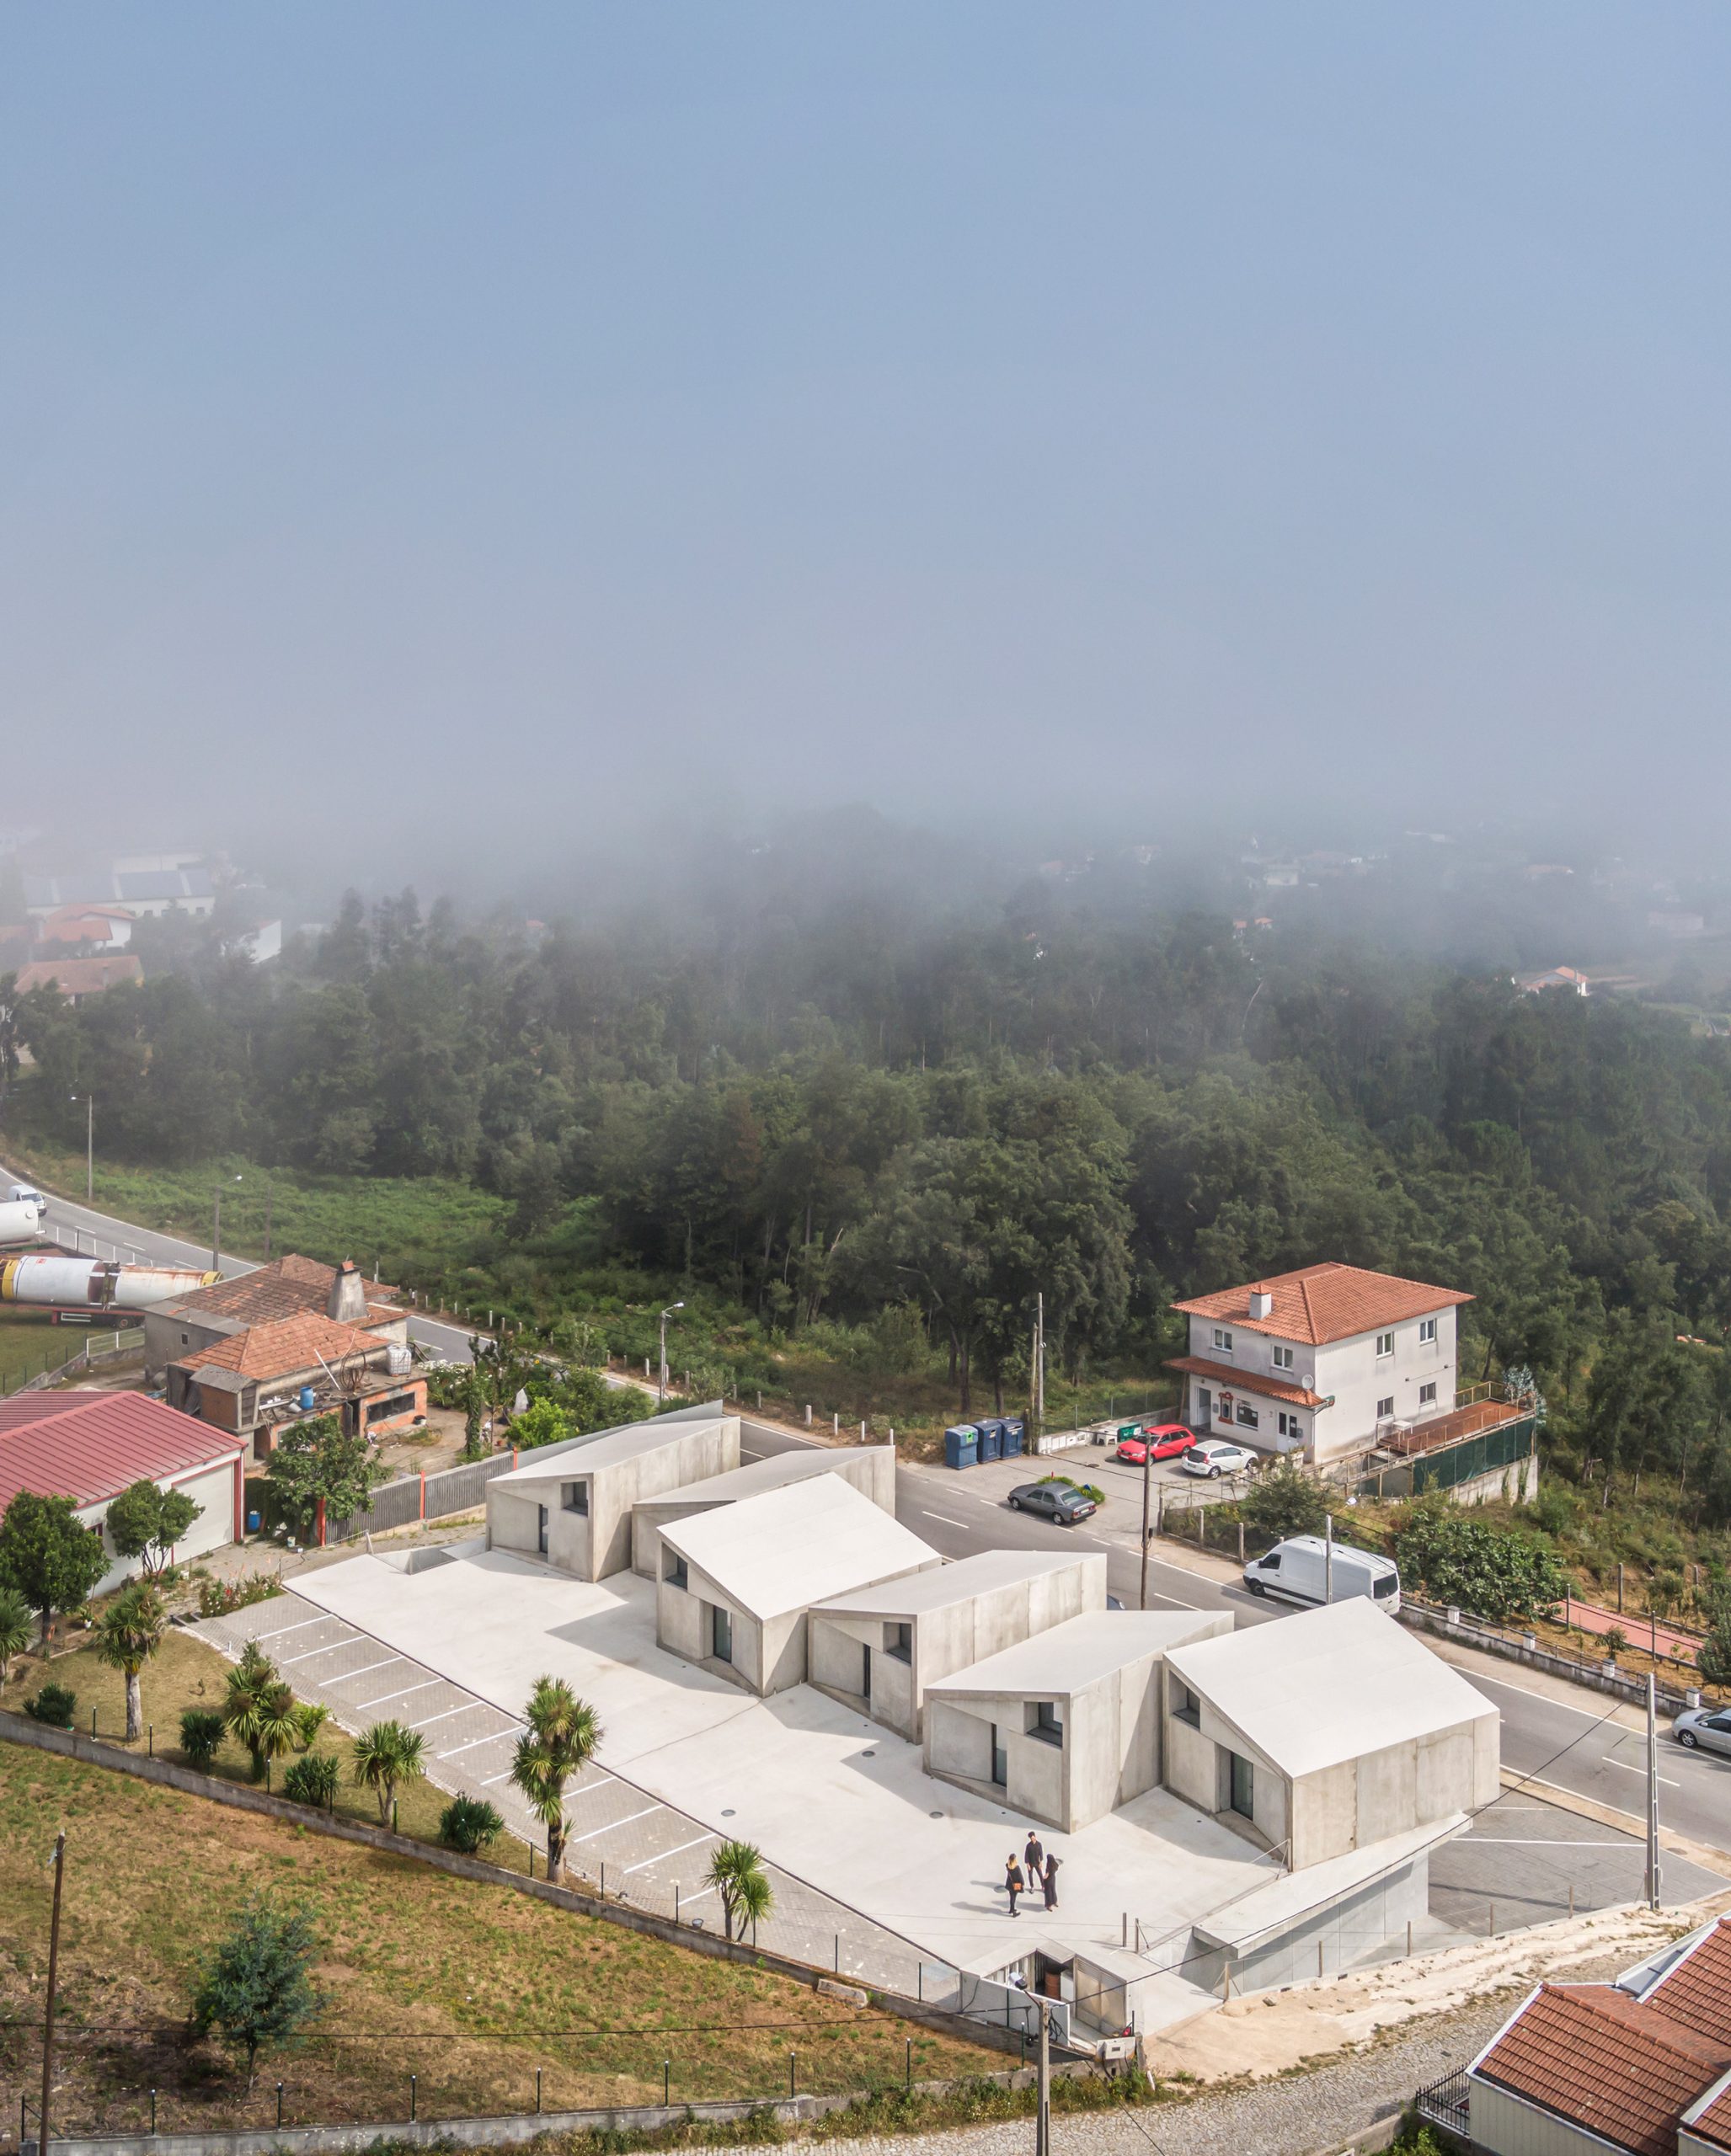 Ariel view of VDC modular prefabricated concrete housing by Summary in Portugal